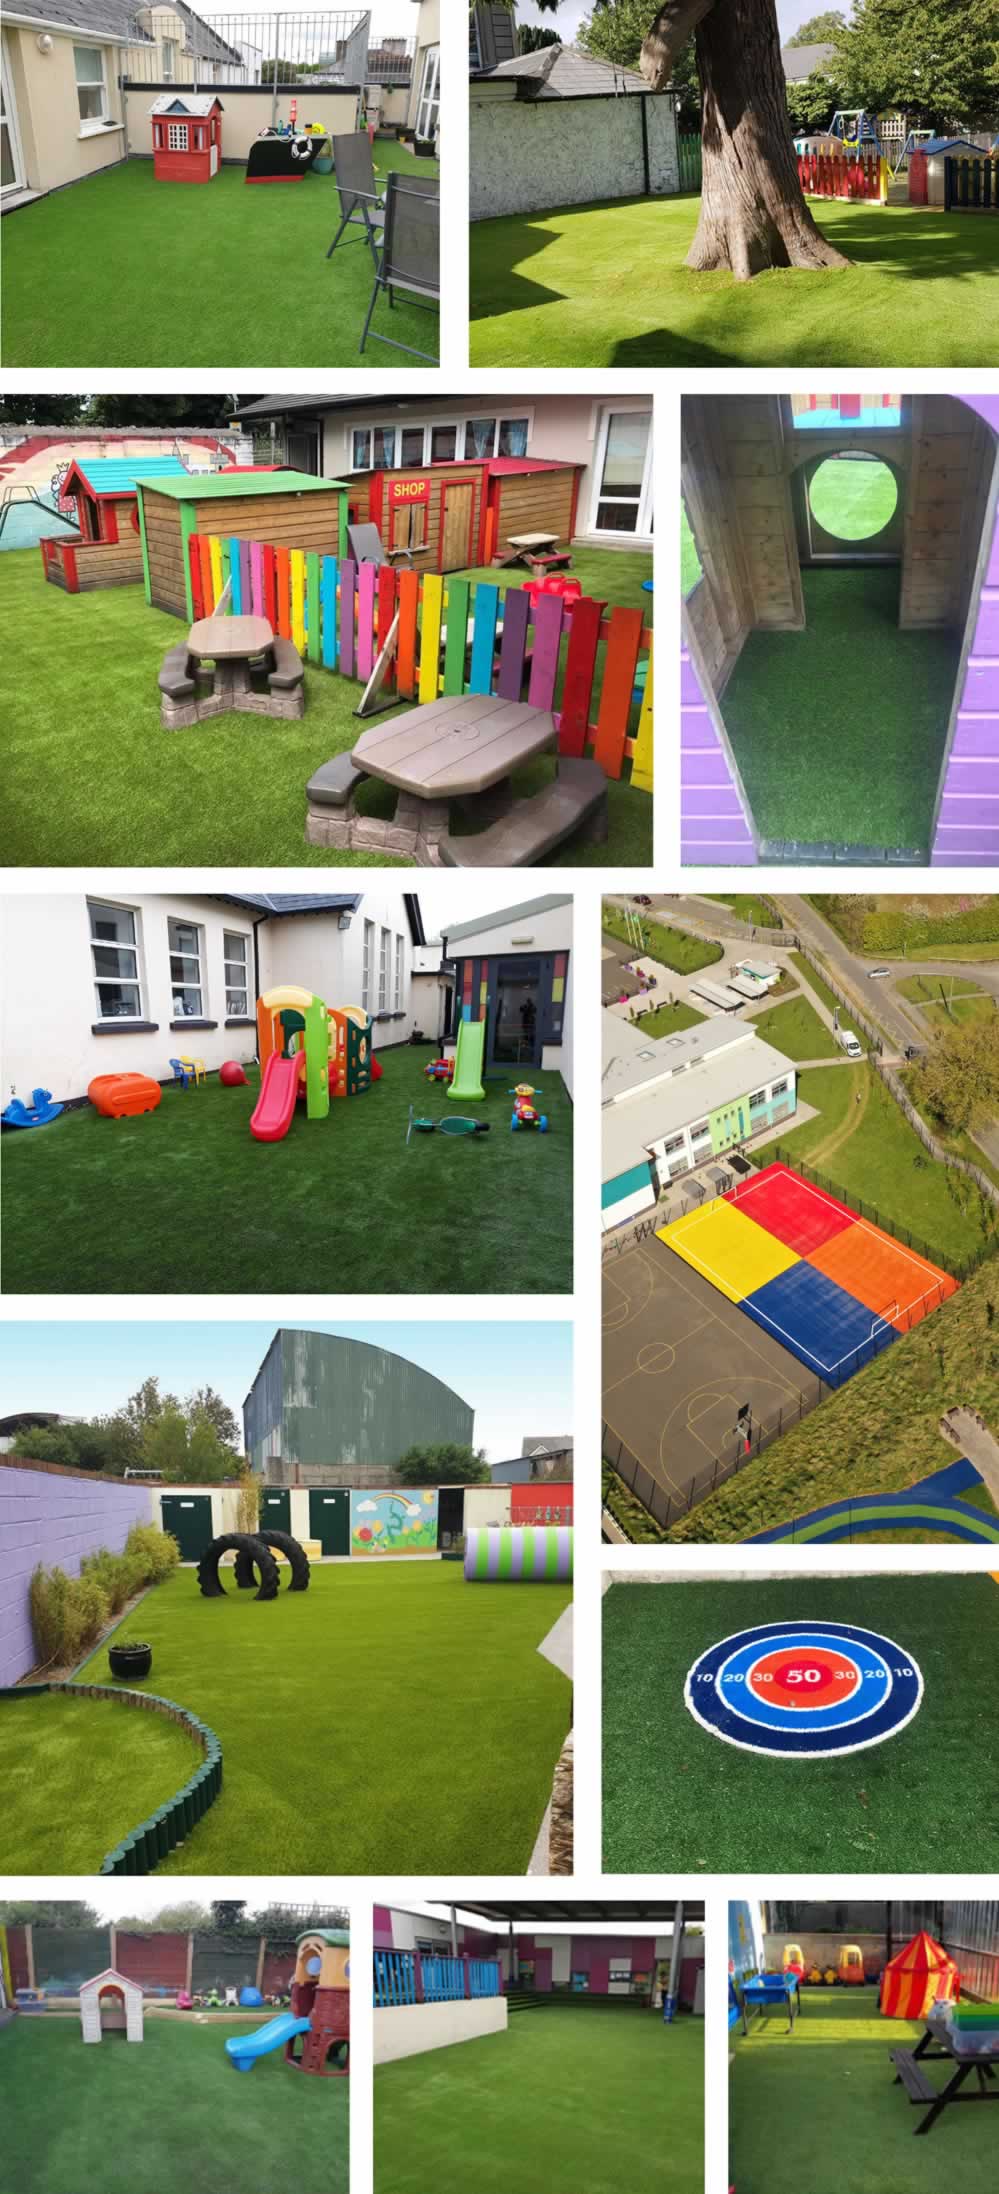 Artificial grass for creches, preschools and play areas